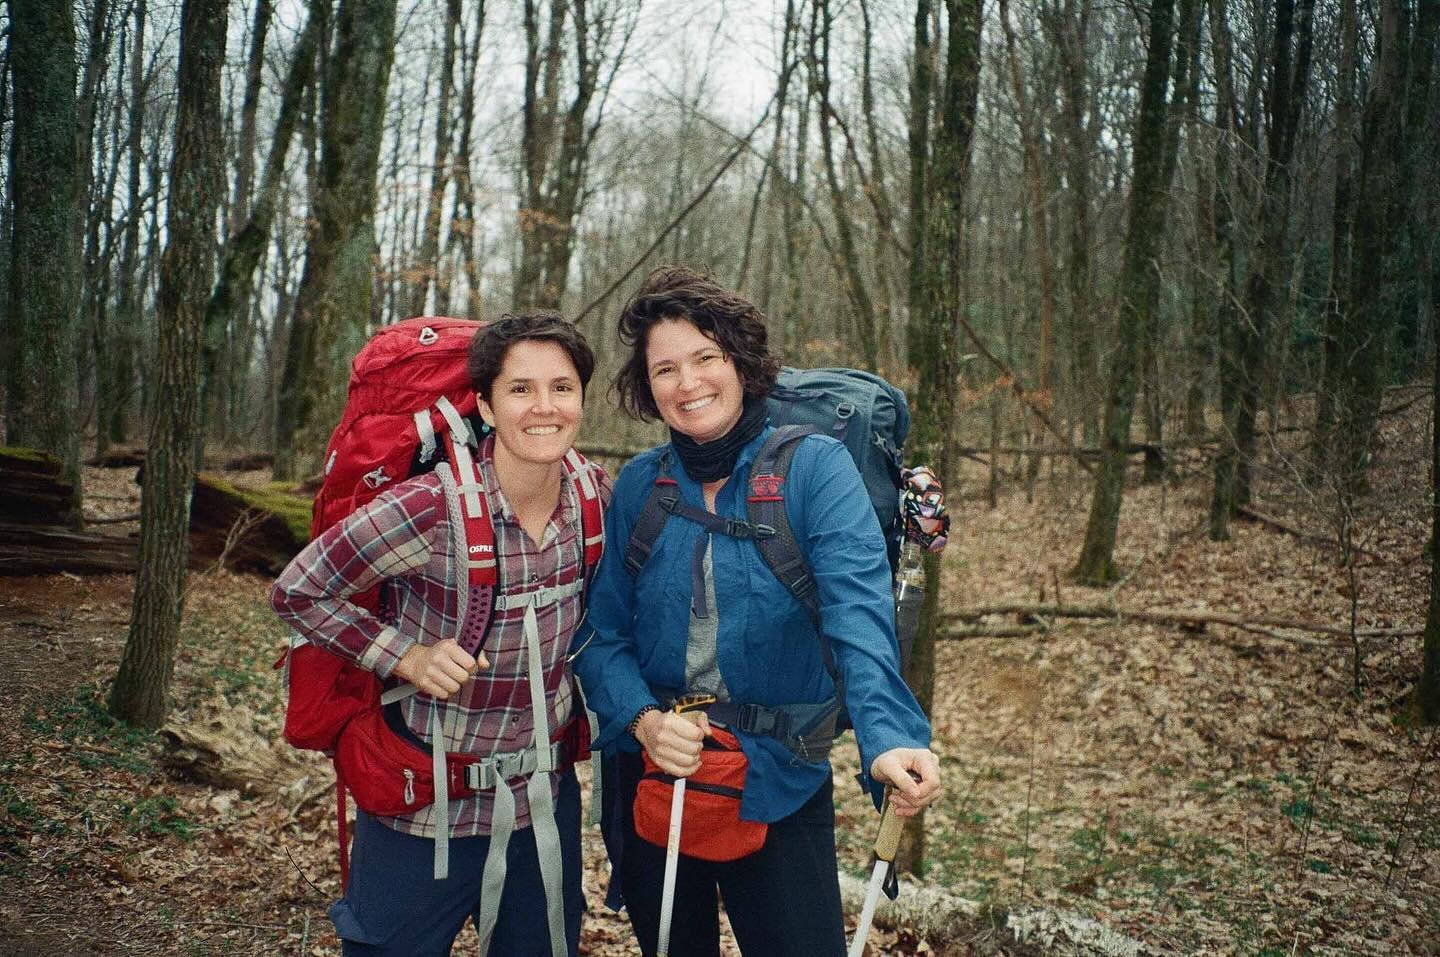 Happy birthday to my OG best friend, my sister Roo. We got to hike 30 miles of the Appalachian Trail together a few weeks ago, and whenever I reflect on it, a wave of gratitude hits me straight to the heart. BAM!🫀It was hard and fun and funny and we